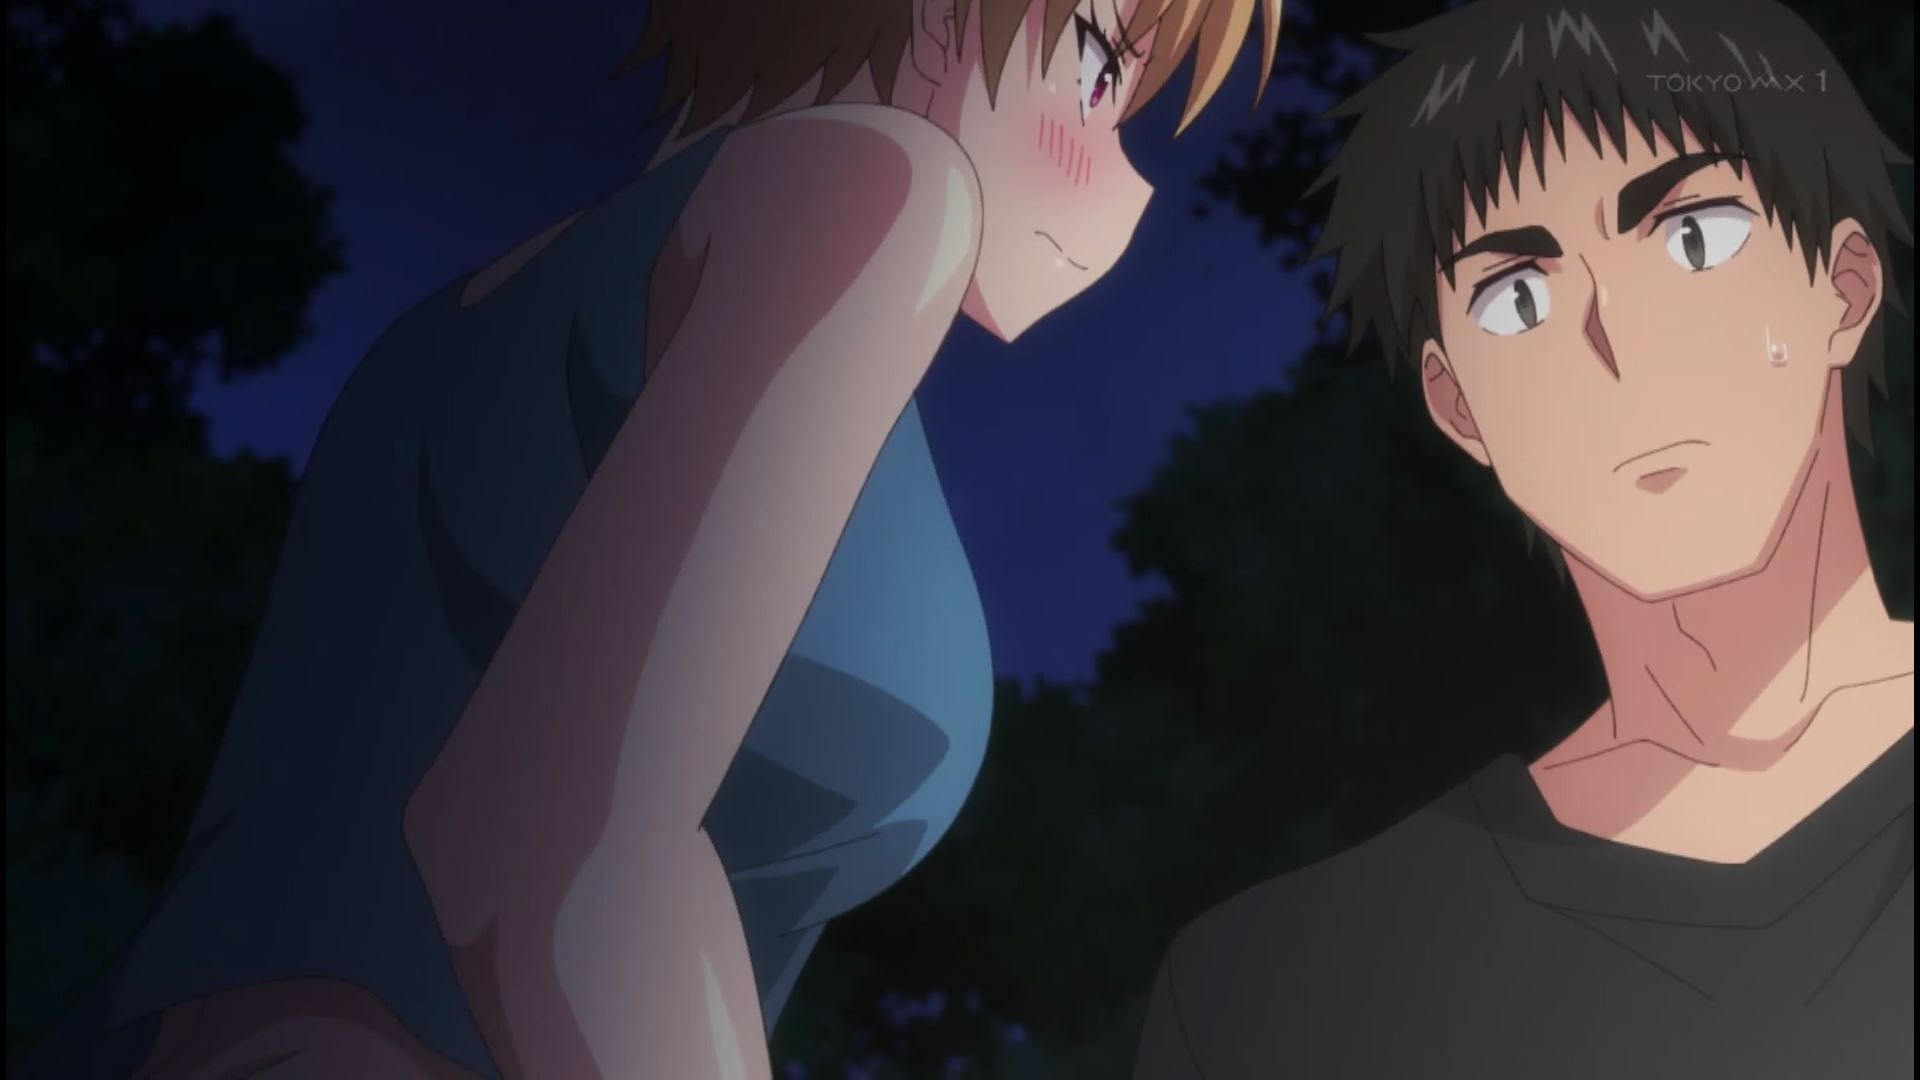 outdoors in episode 7 of the anime "Harem Kyampu!" And go straight to the ecchi scene! 6